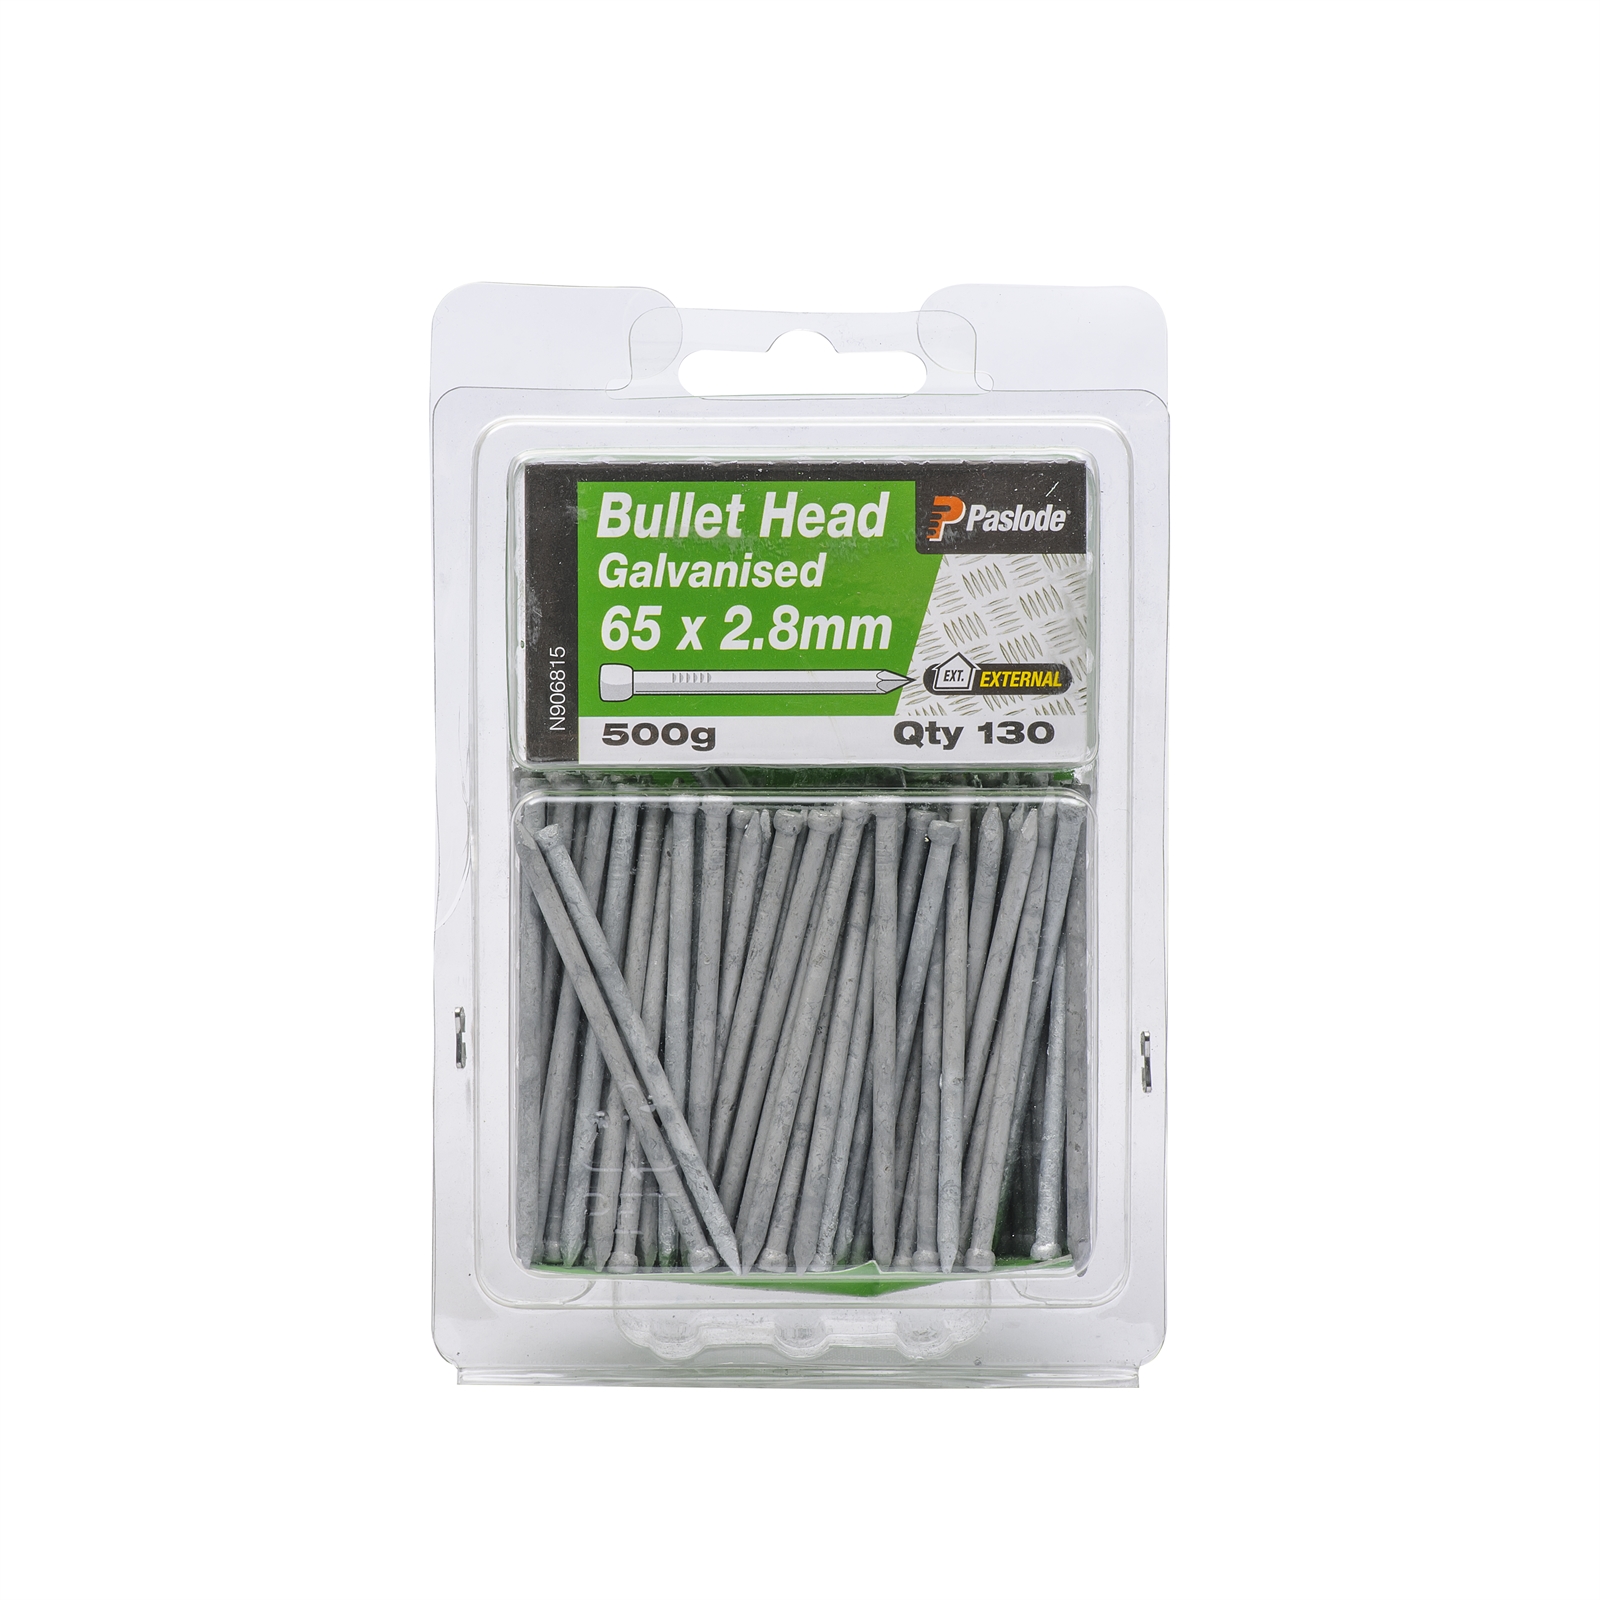 Paslode 65 x 2.8mm 500g Galvanised Bullet Head Nails - 130 Pack